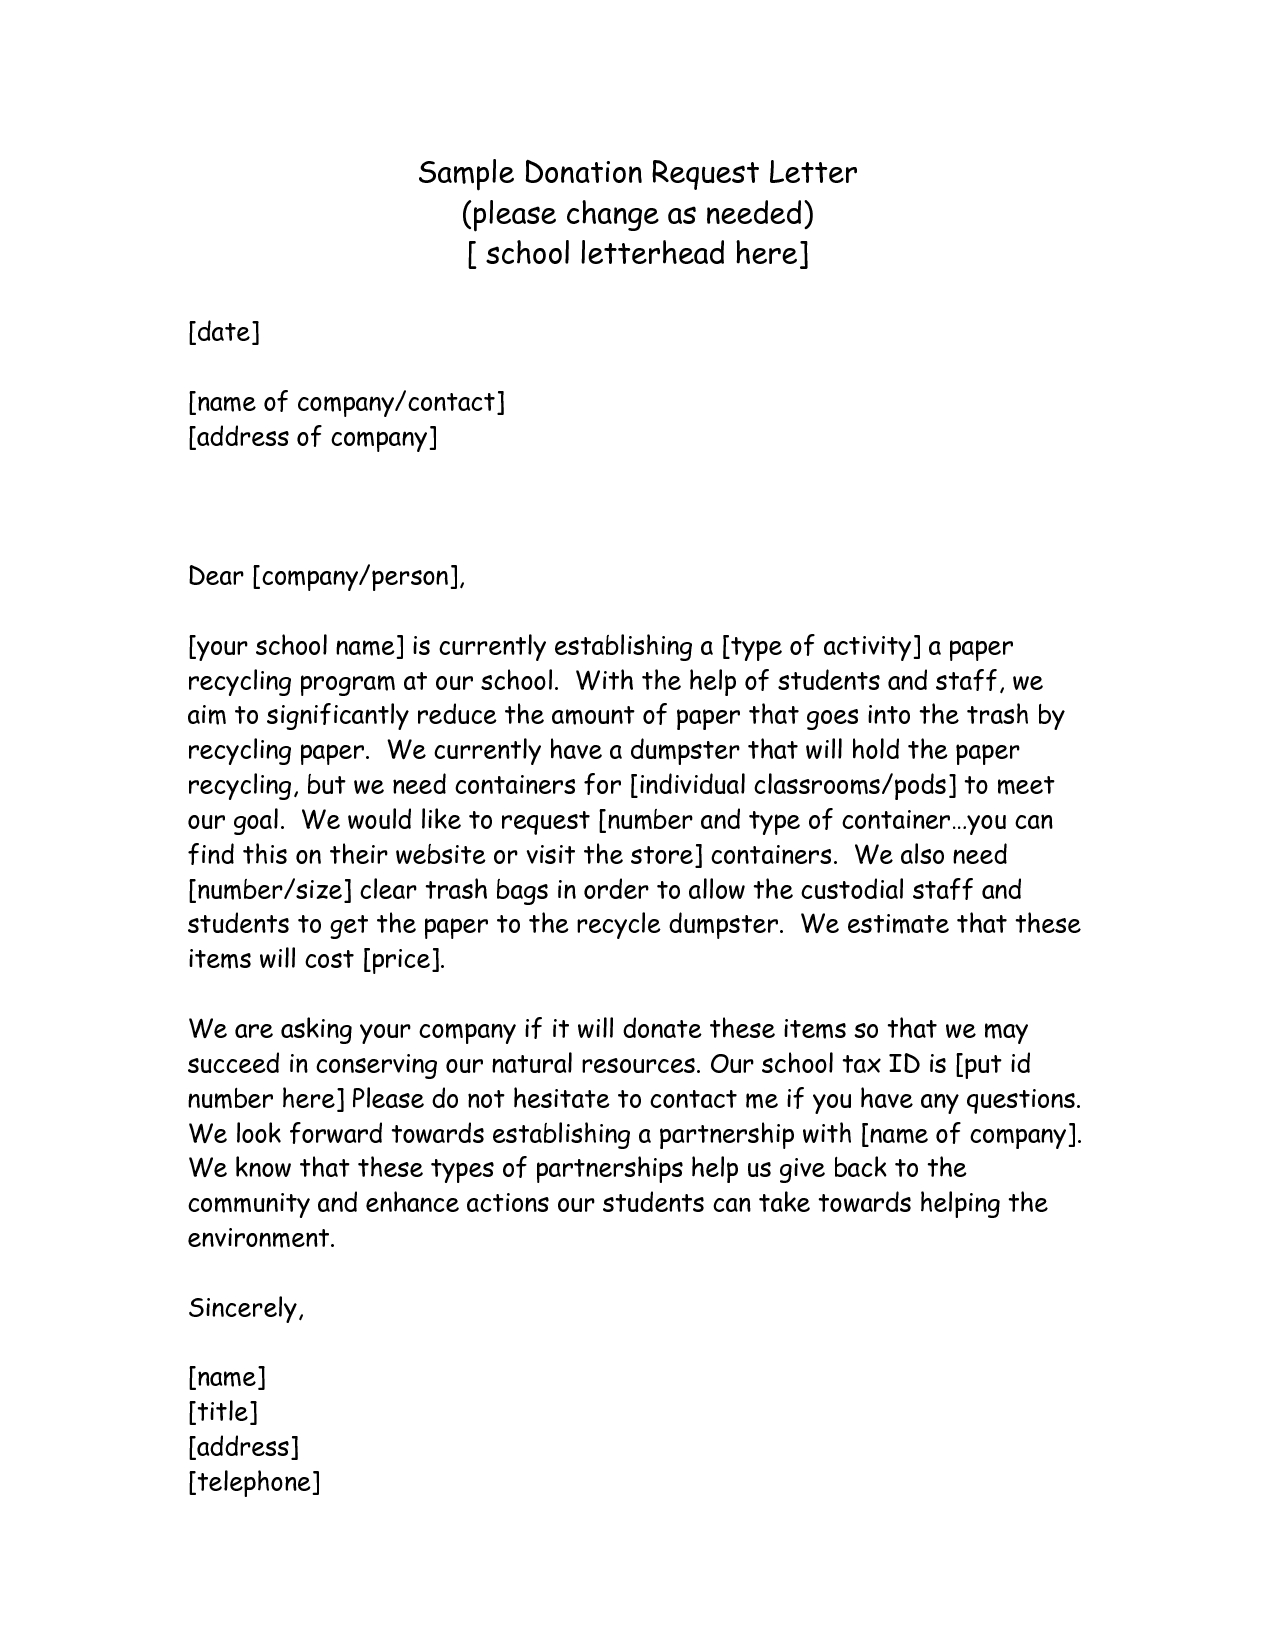 Template Letter Requesting Donations for Fundraiser - Examples for Donation Letters